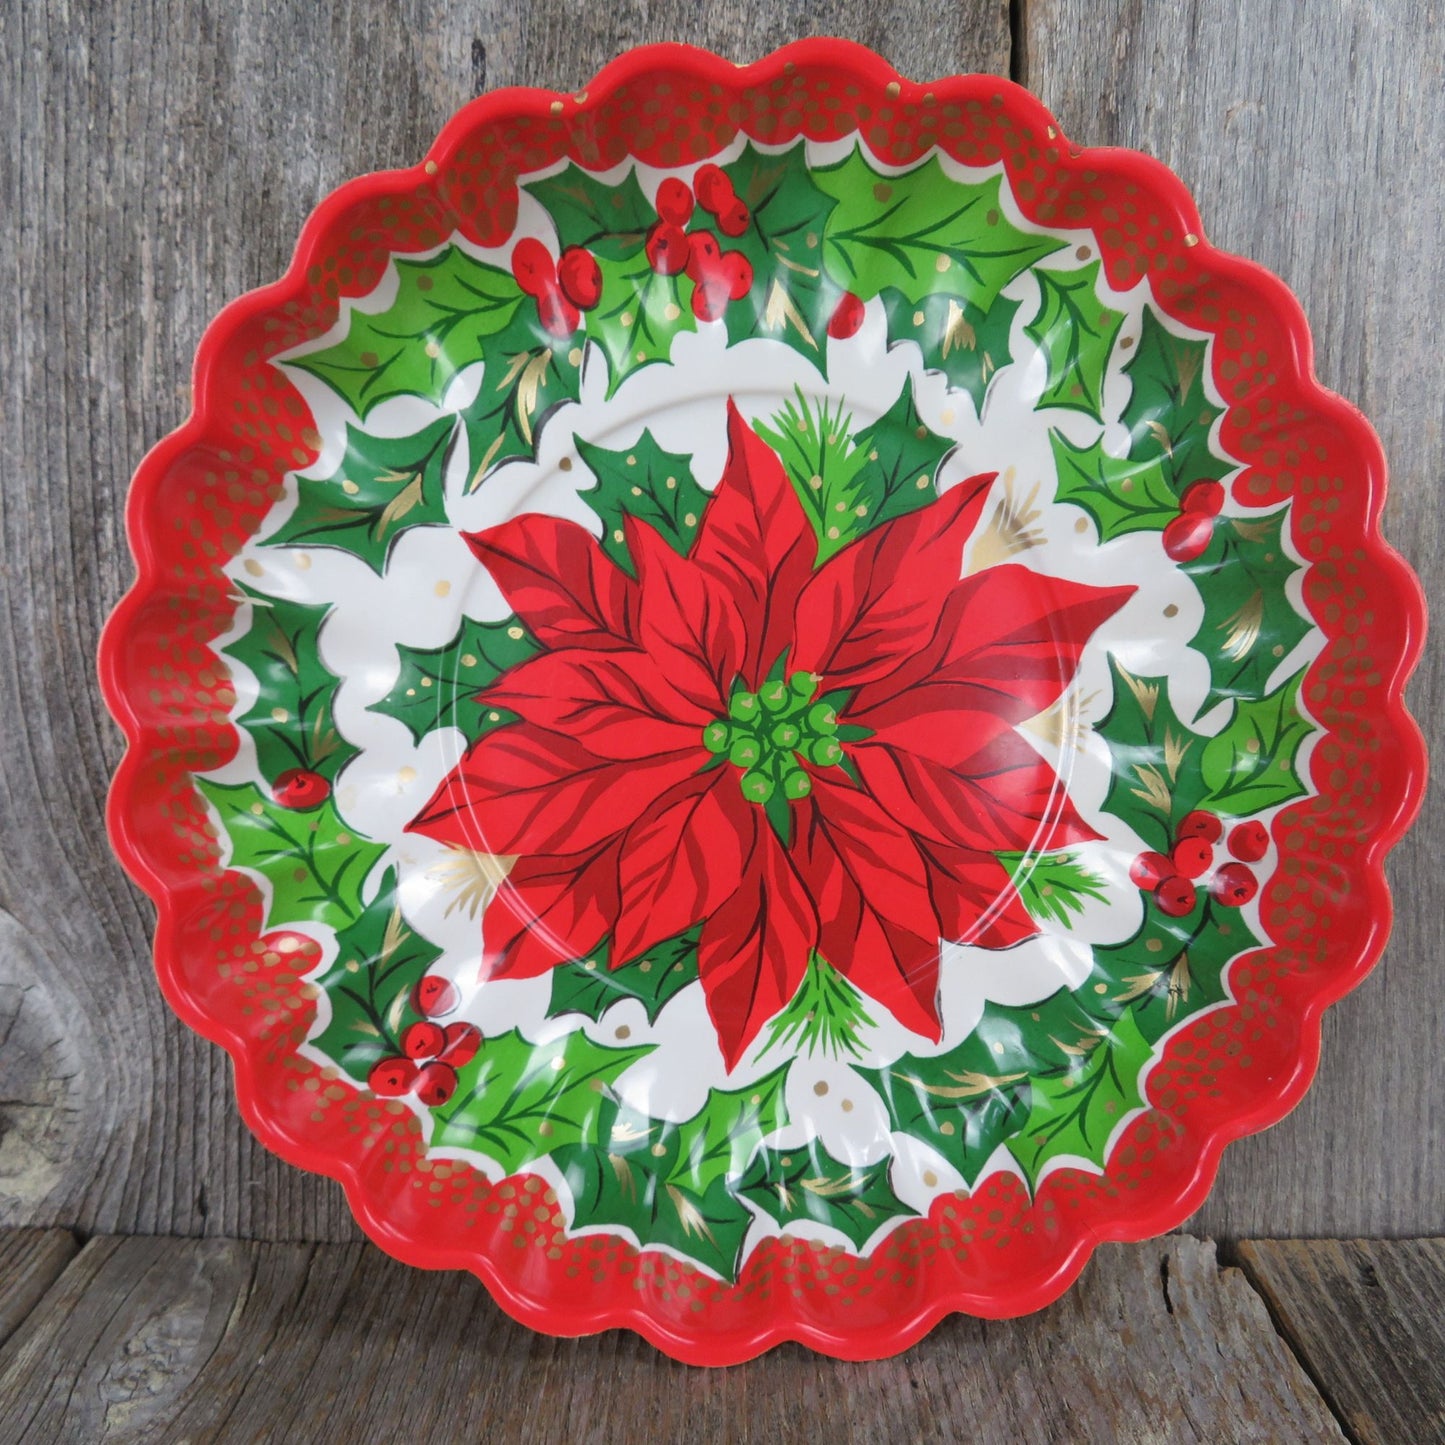 Vintage Poinsettia Cookie Plate Plastic Platter Scalloped Edge Serving Dish Gift Tray Holly Hostess Party Red Green